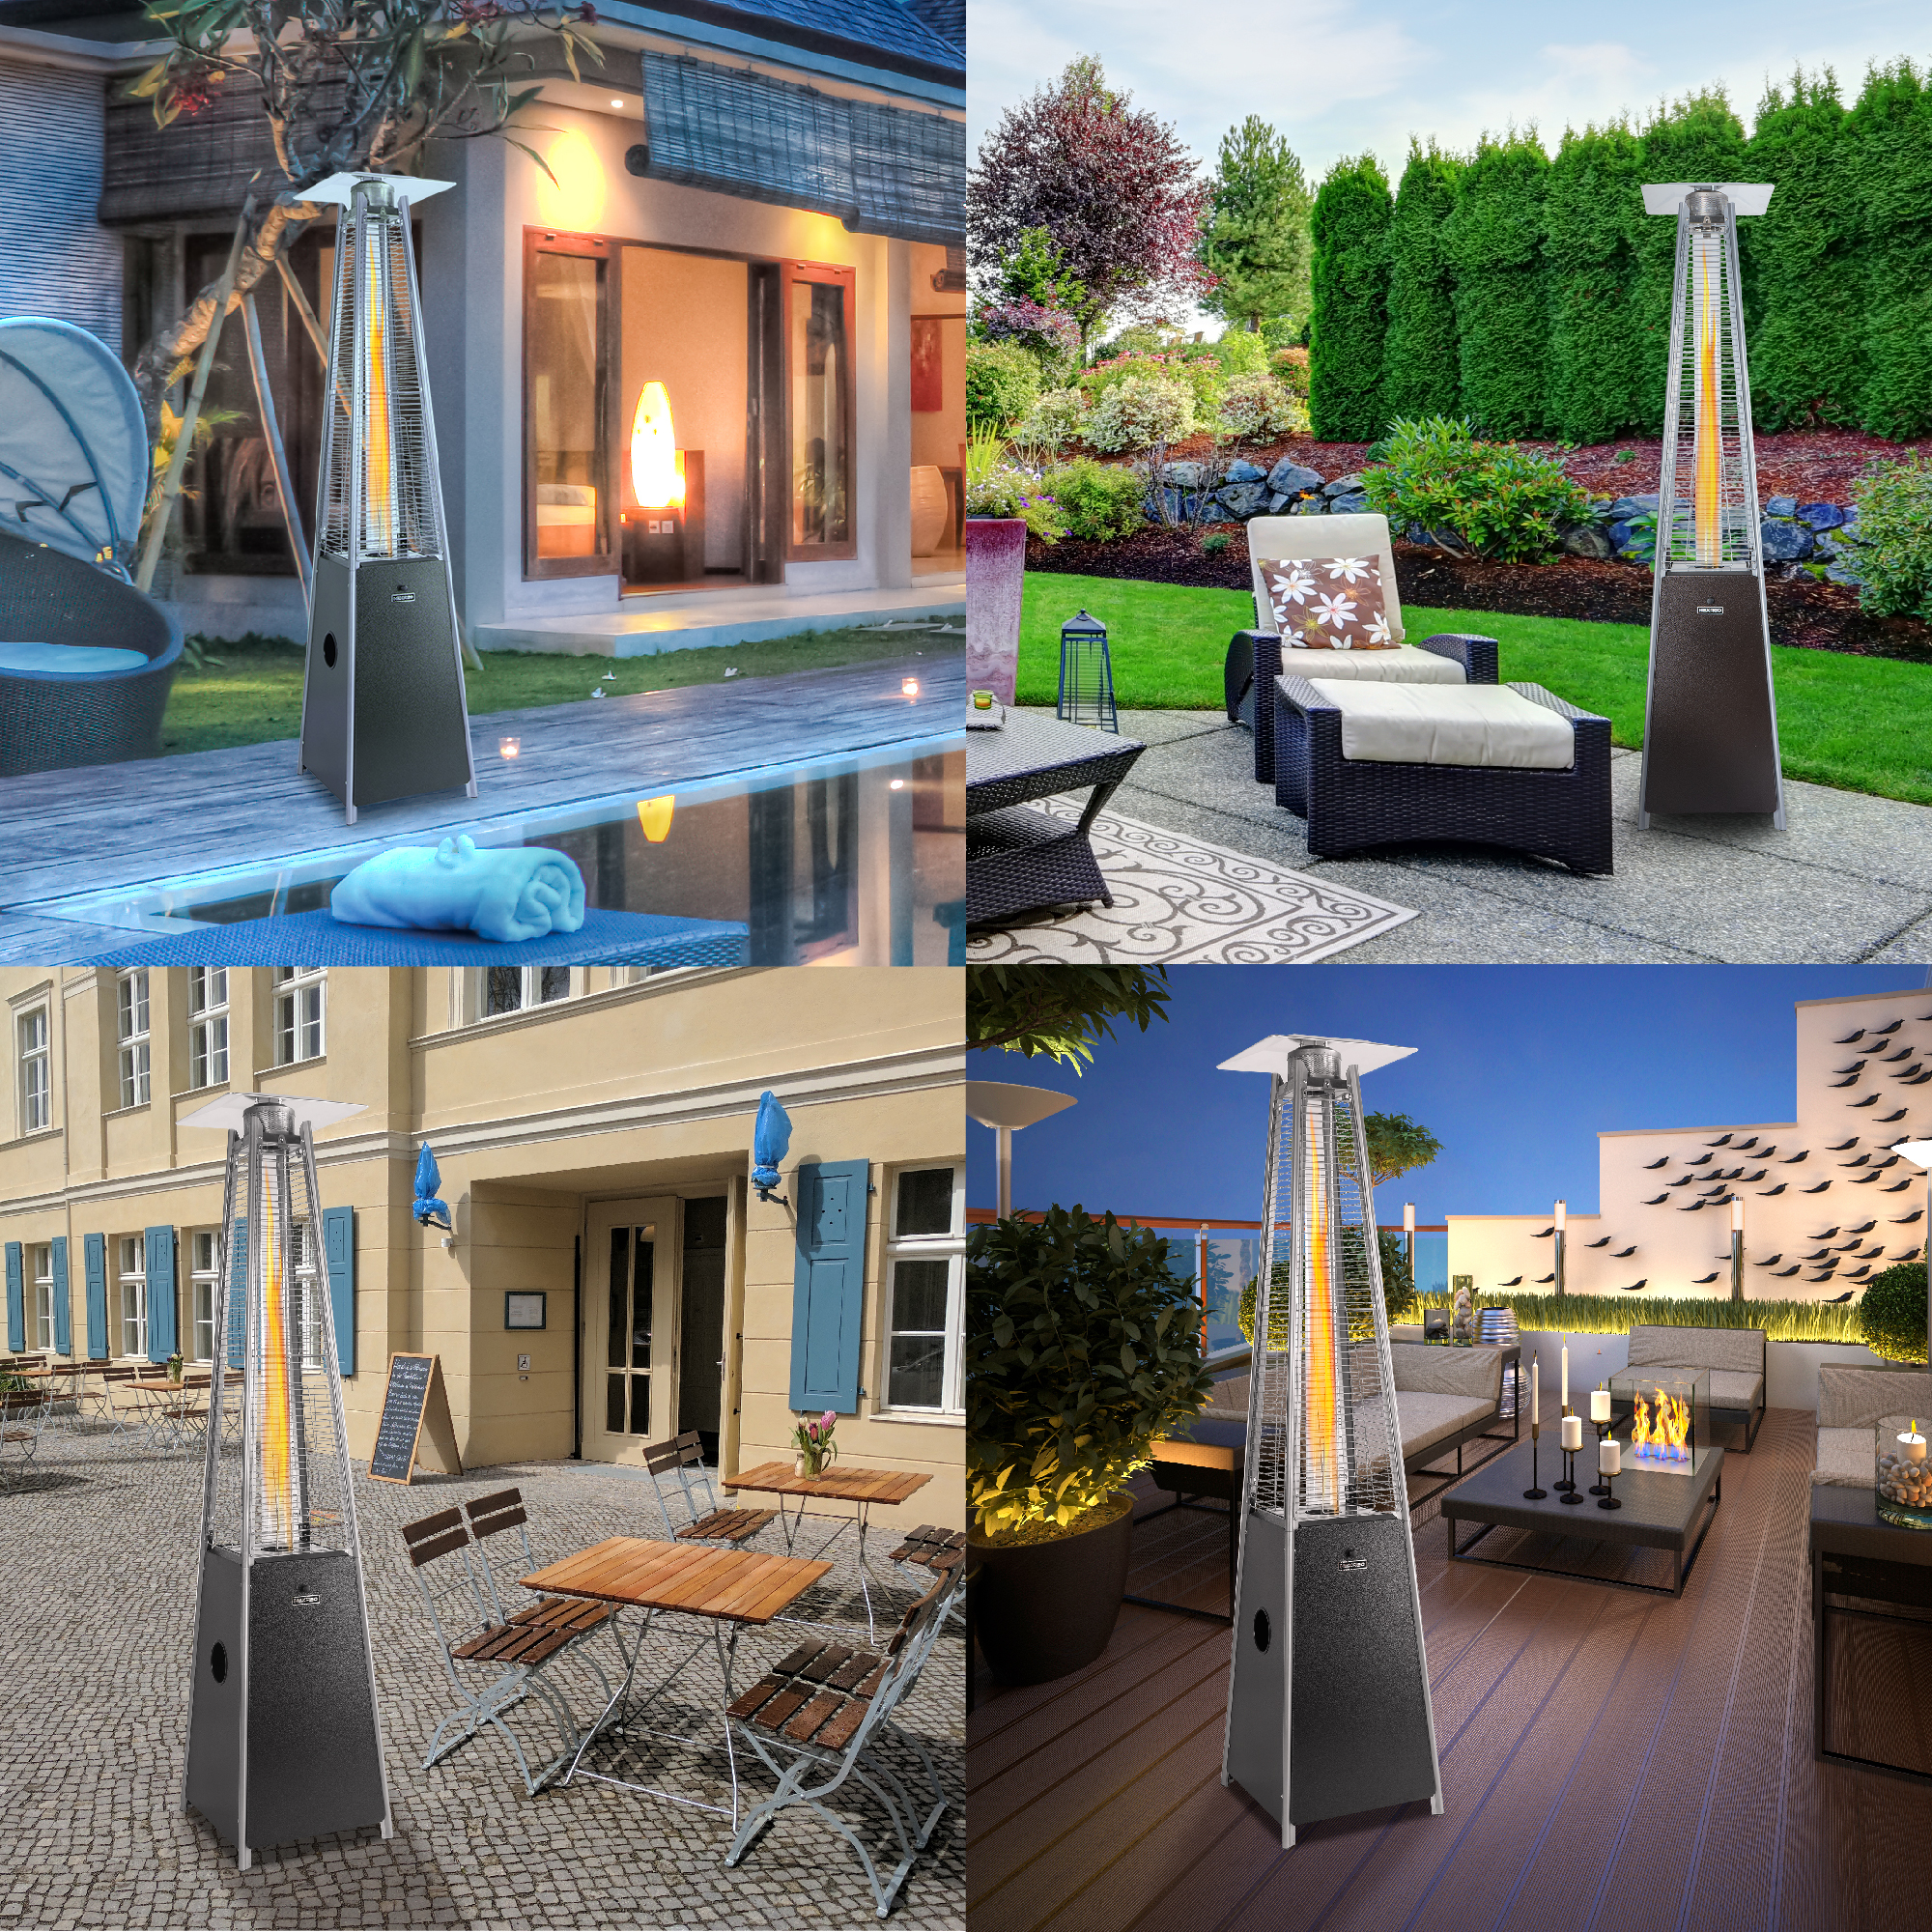 HEXAGO 40,000 BTU Pyramid Comme rcial Outdoor Patio Heater with Wheels, ETL Listed - image 2 of 7